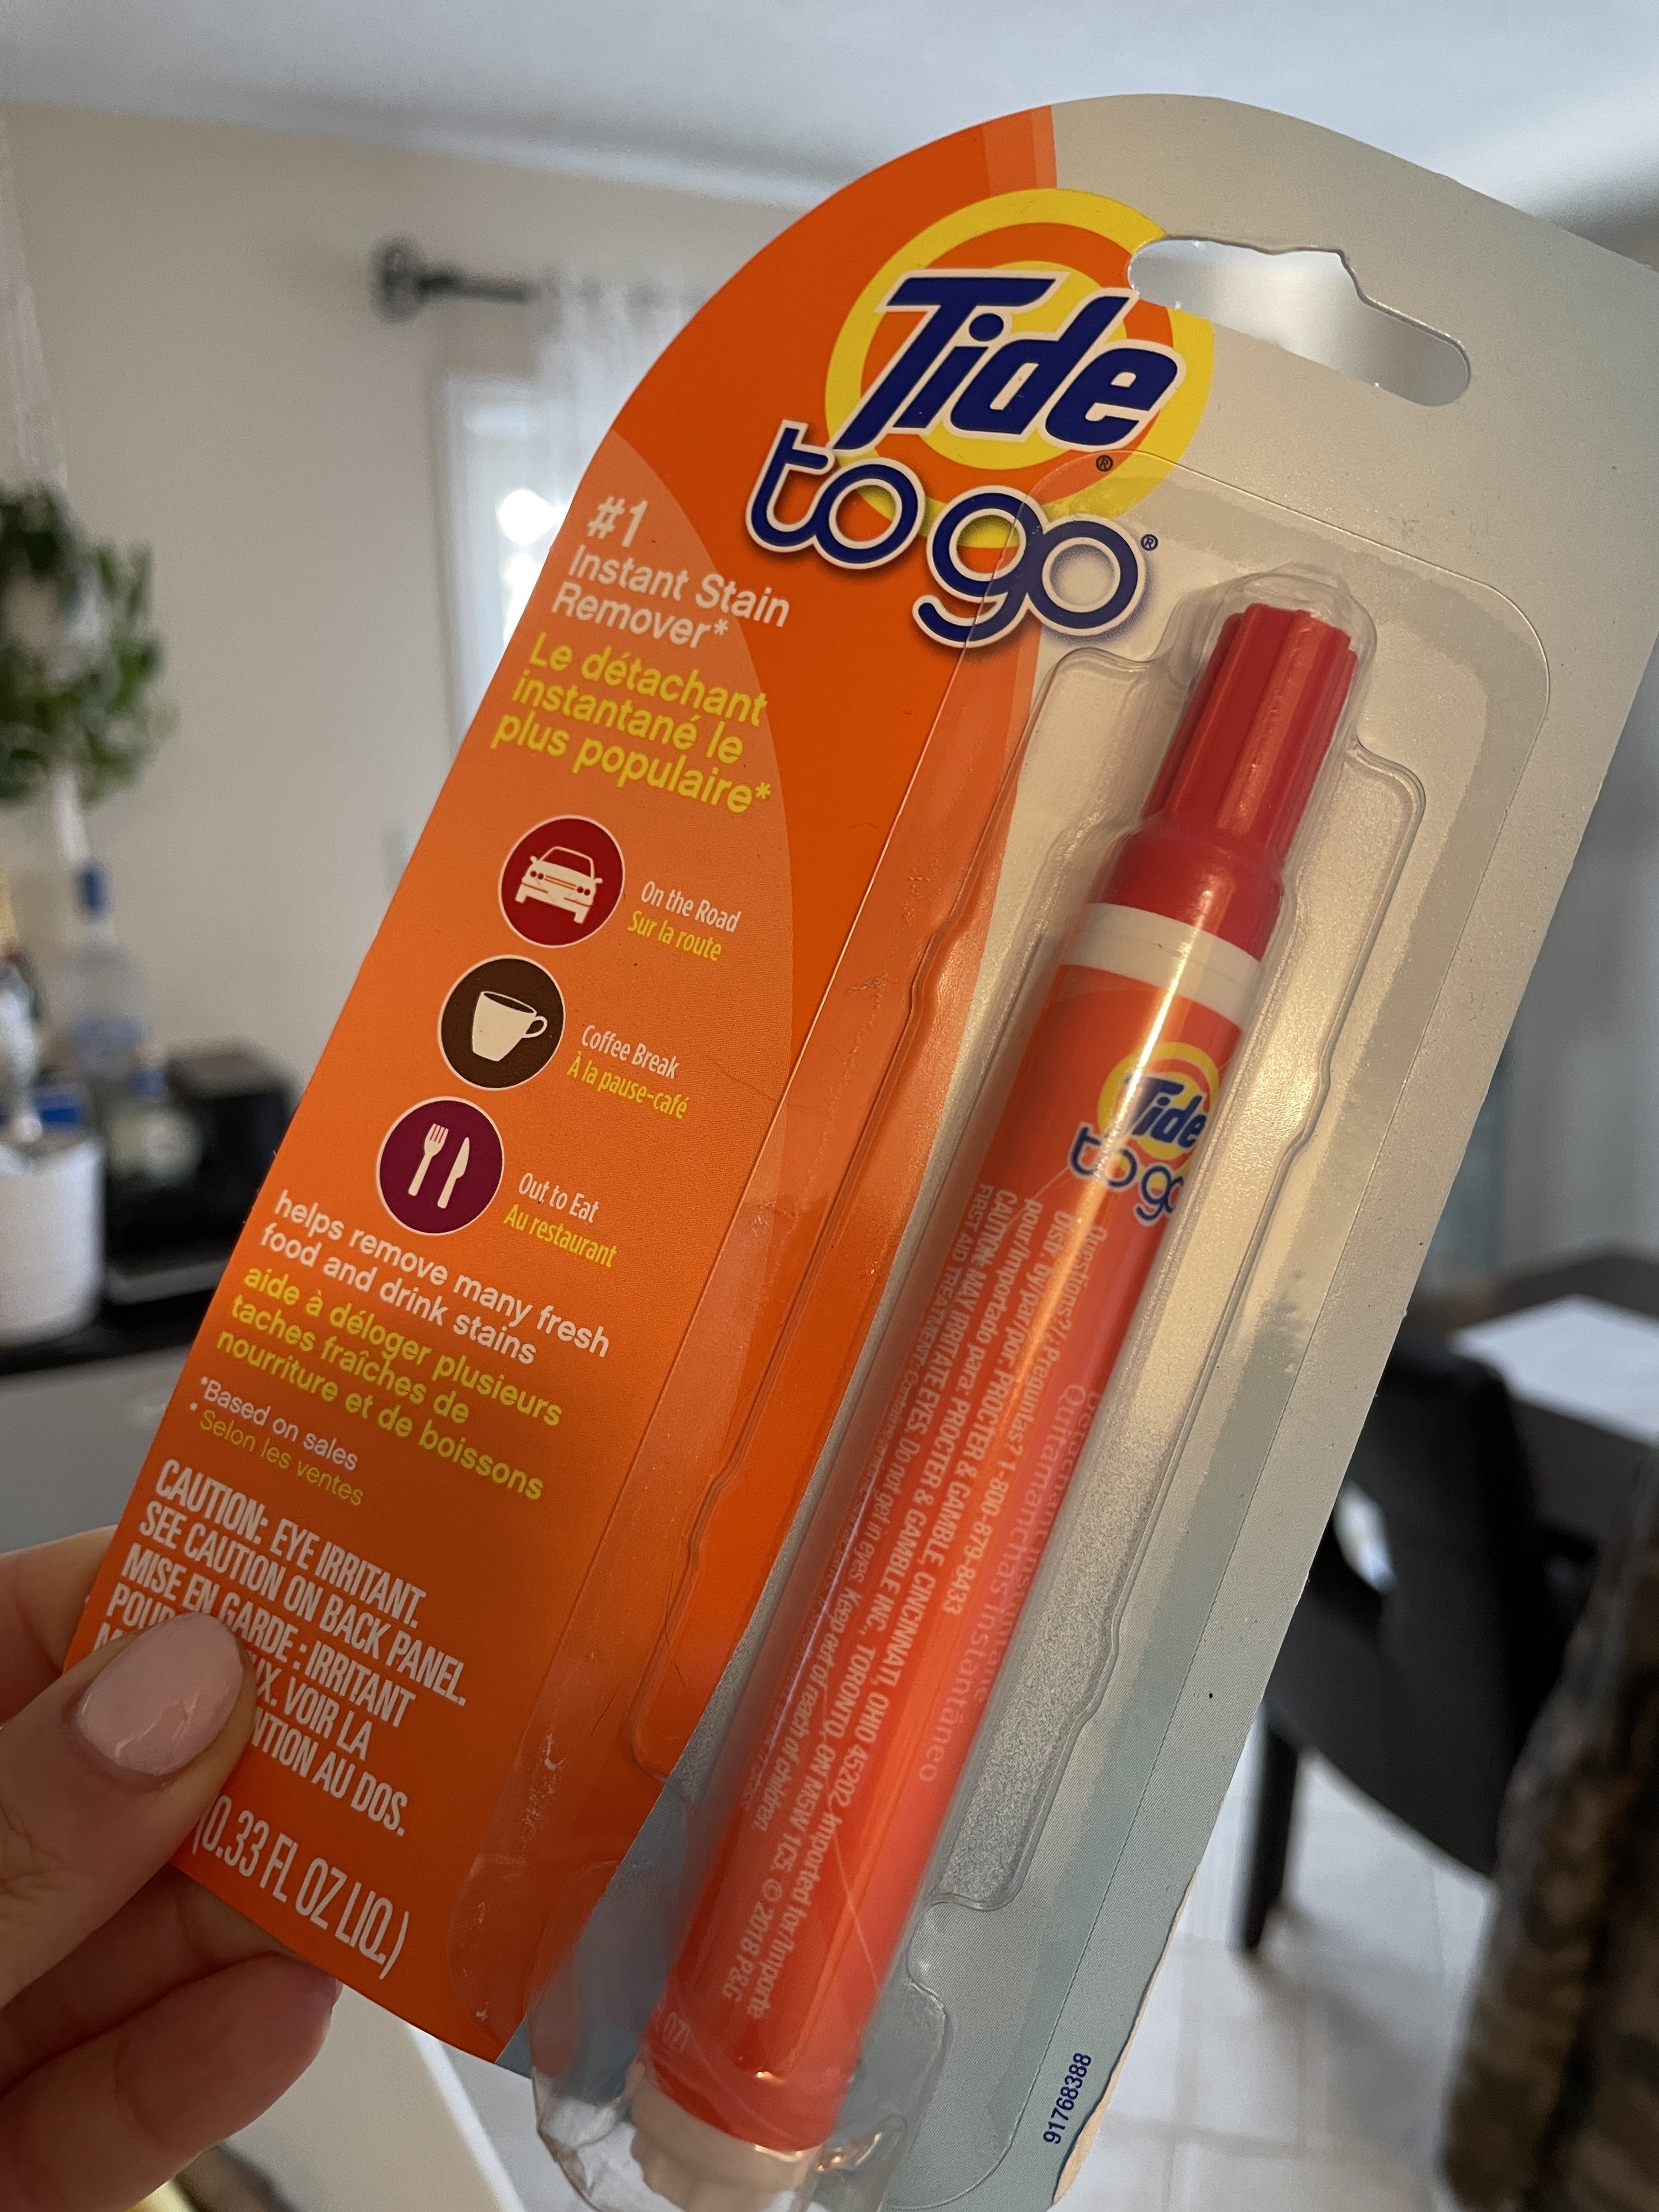 May holding the Tide pen in its packaging